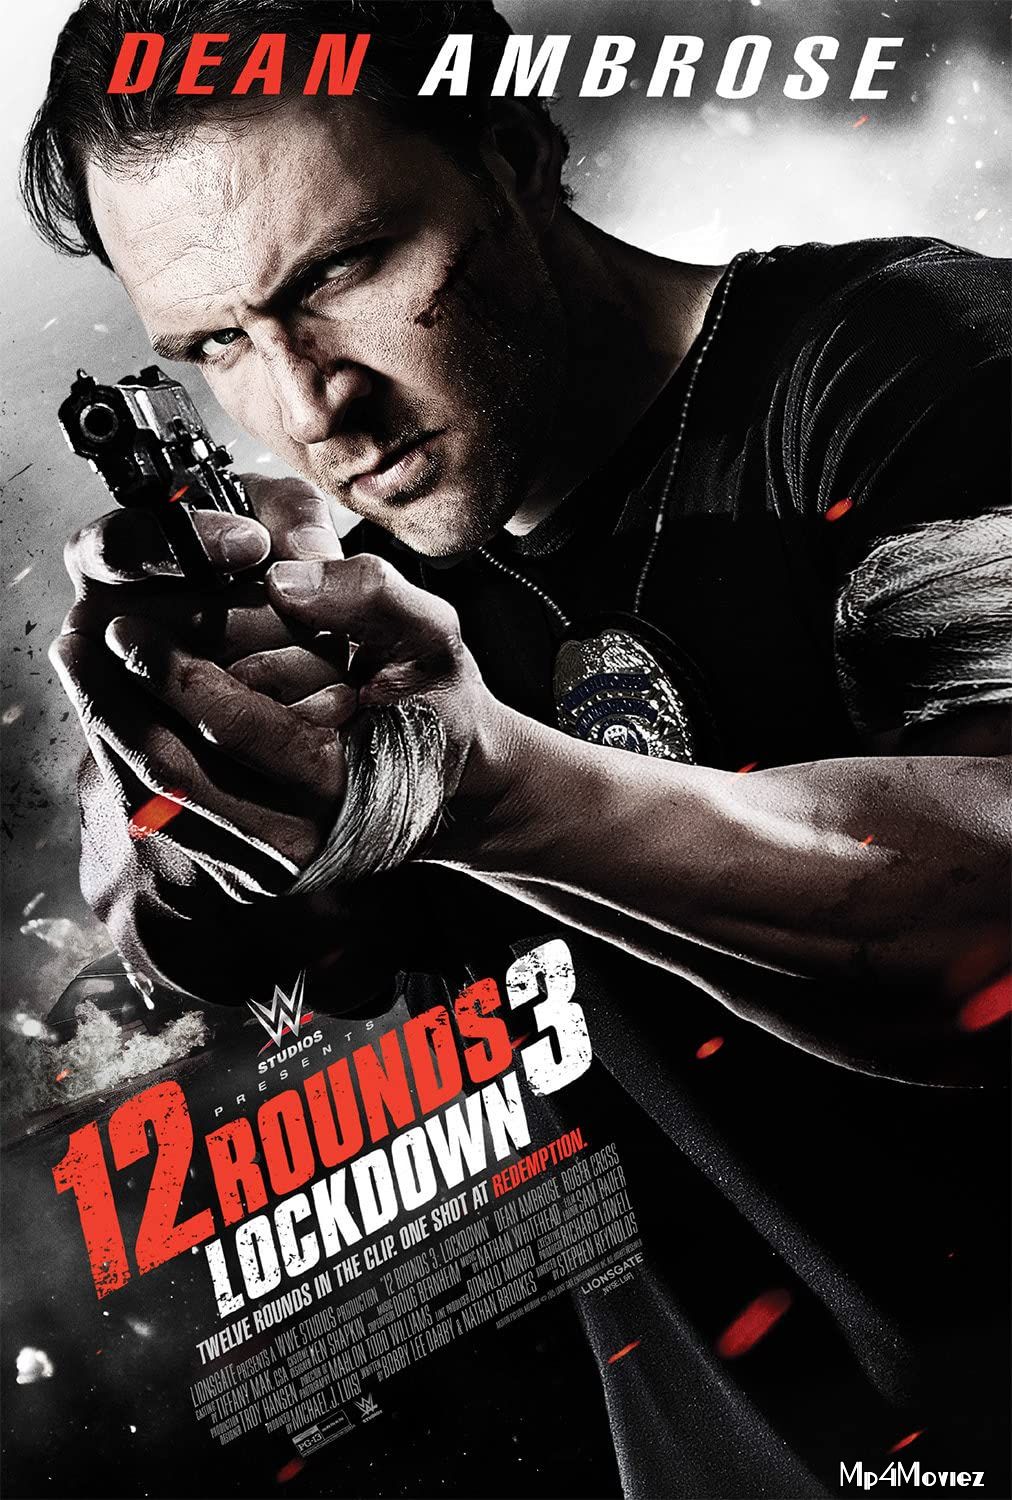 12 Rounds 3 Lockdown (2015) Hindi Dubbed Movie BluRay download full movie